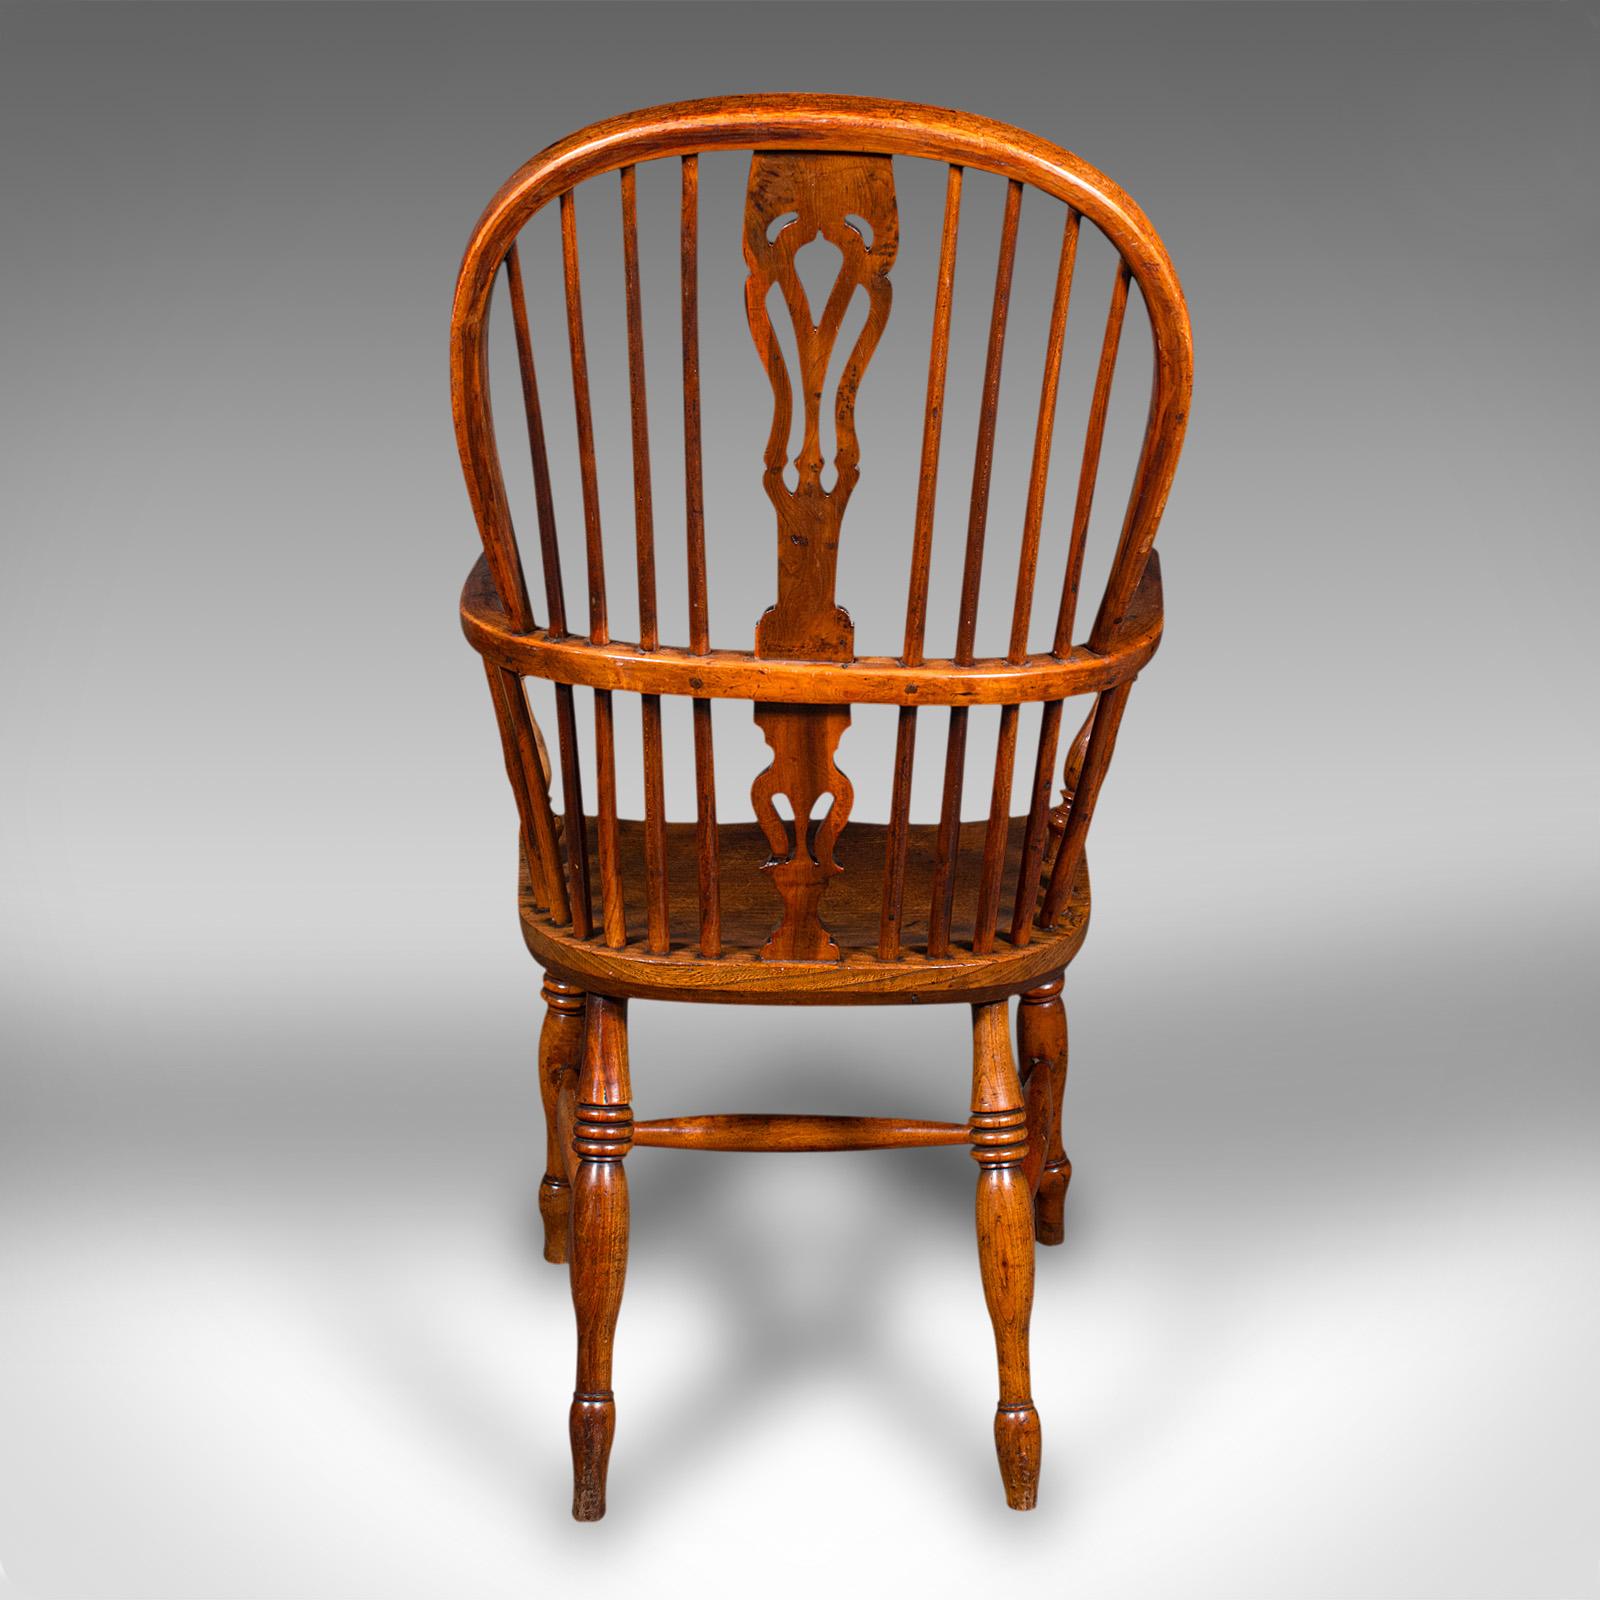 19th Century Antique Windsor Chair, English, Elm, Elbow, Armchair, Country House, Victorian